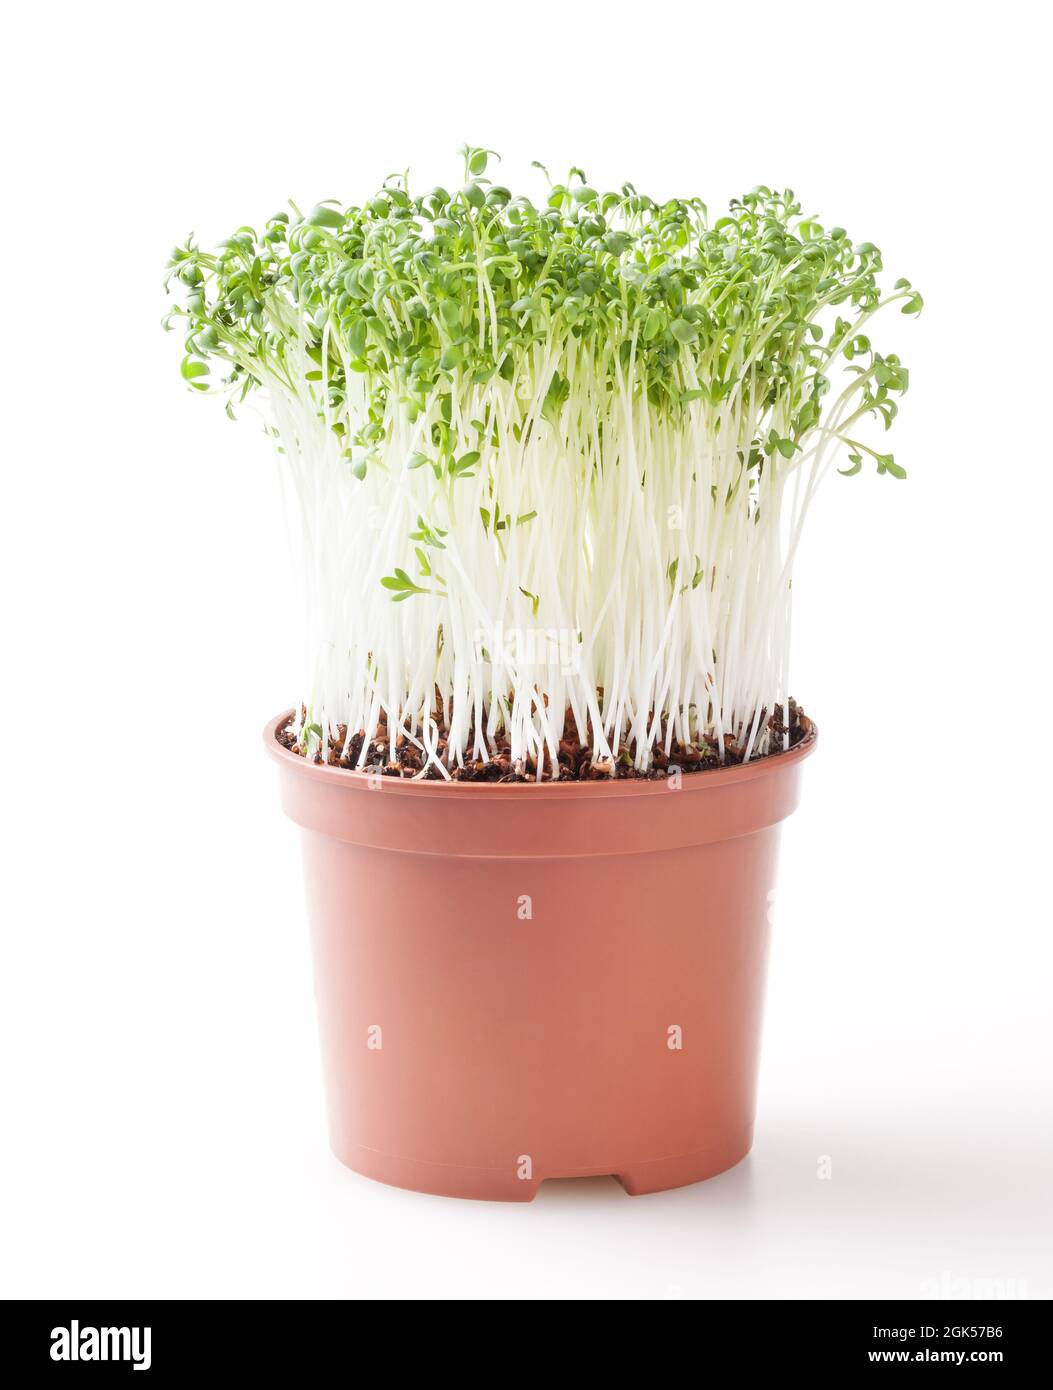 Micro greens garden cress sprouts isolated on white background Stock Photo